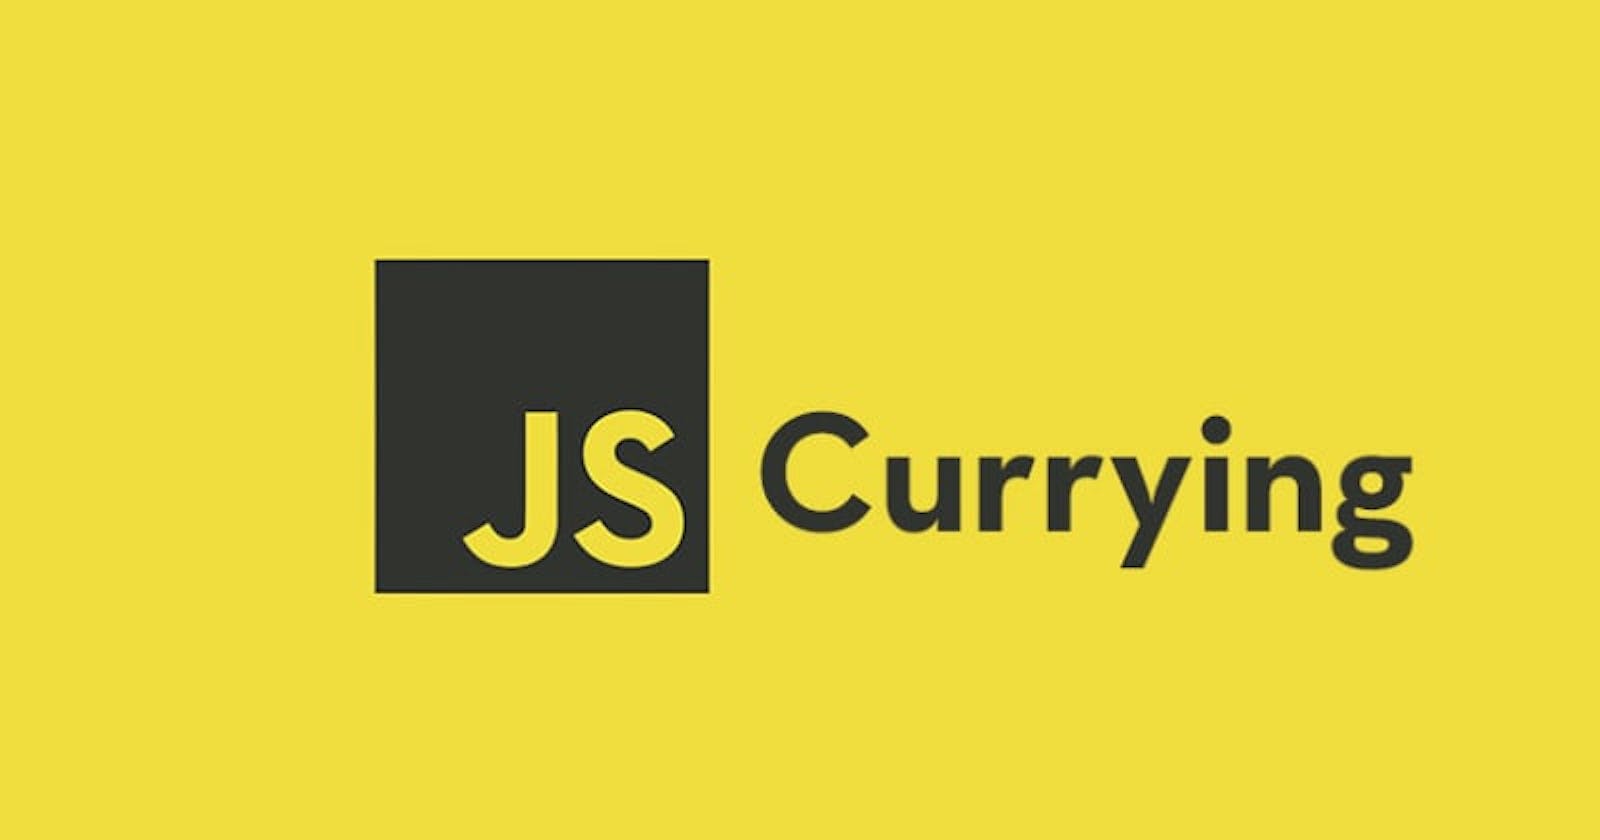 Currying with Javascript